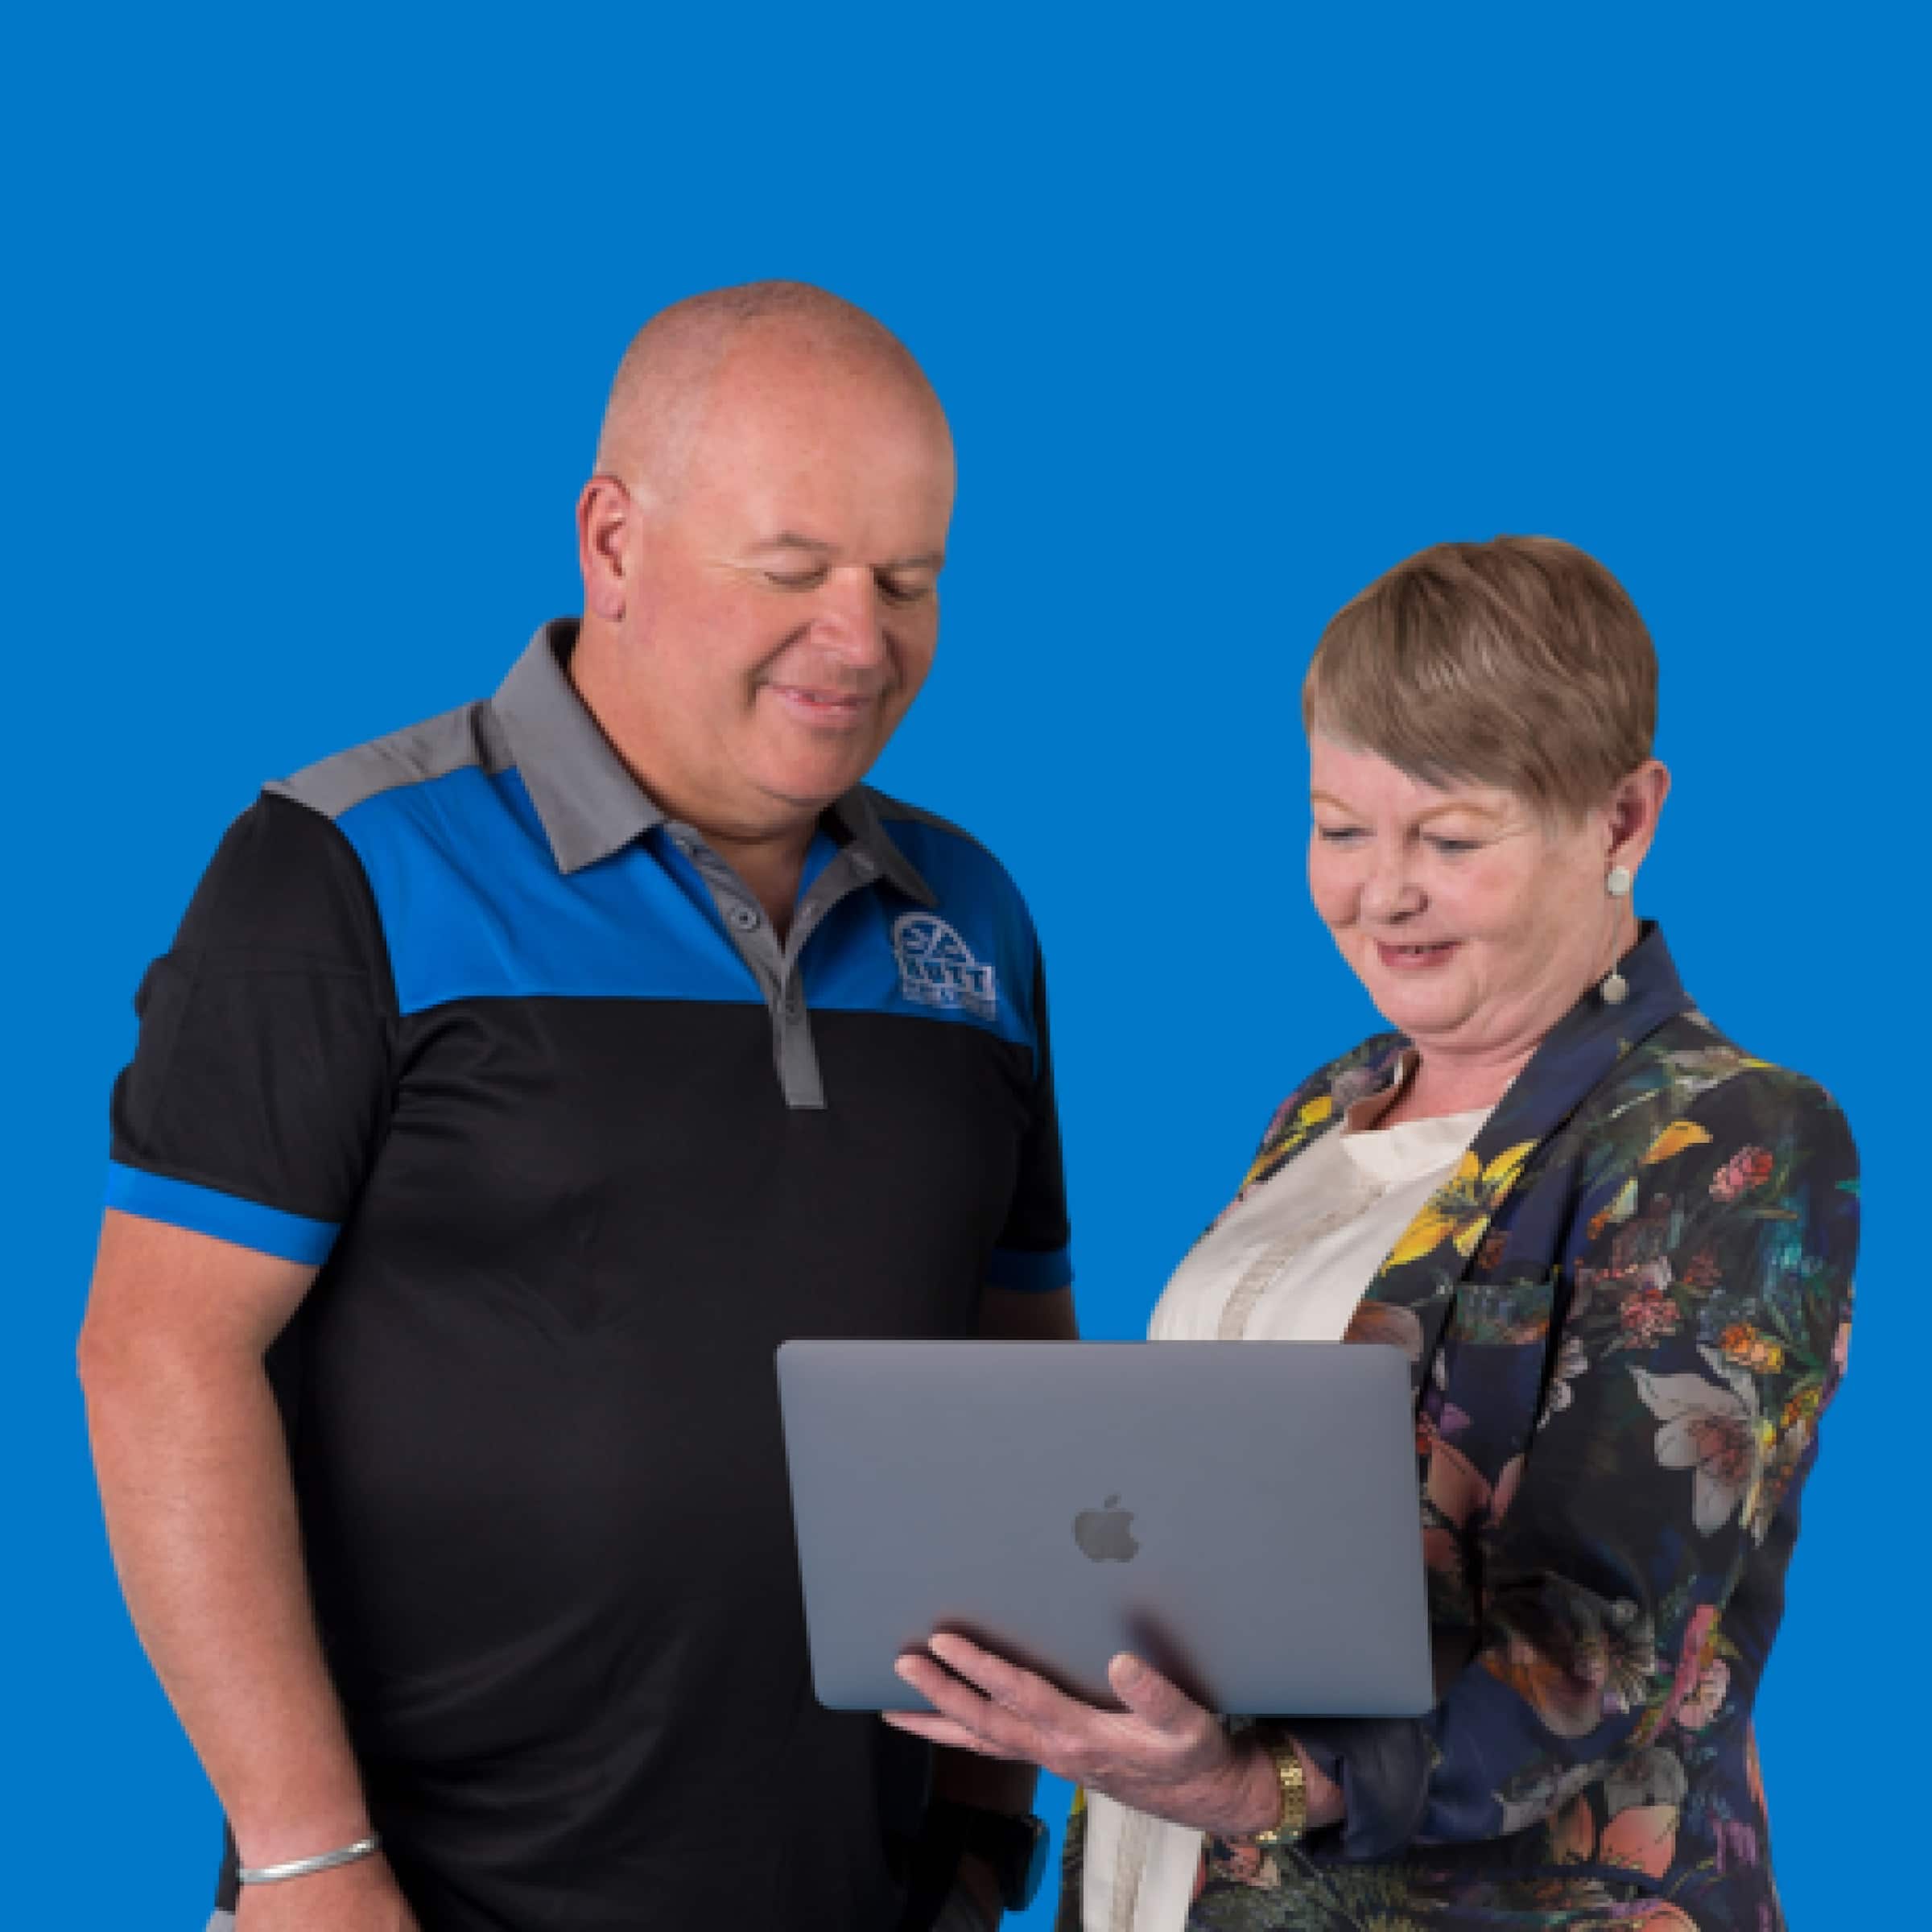 A bookkeeper shows a smiling tradesperson how to see their business figures in Xero’s accounting software on a laptop.